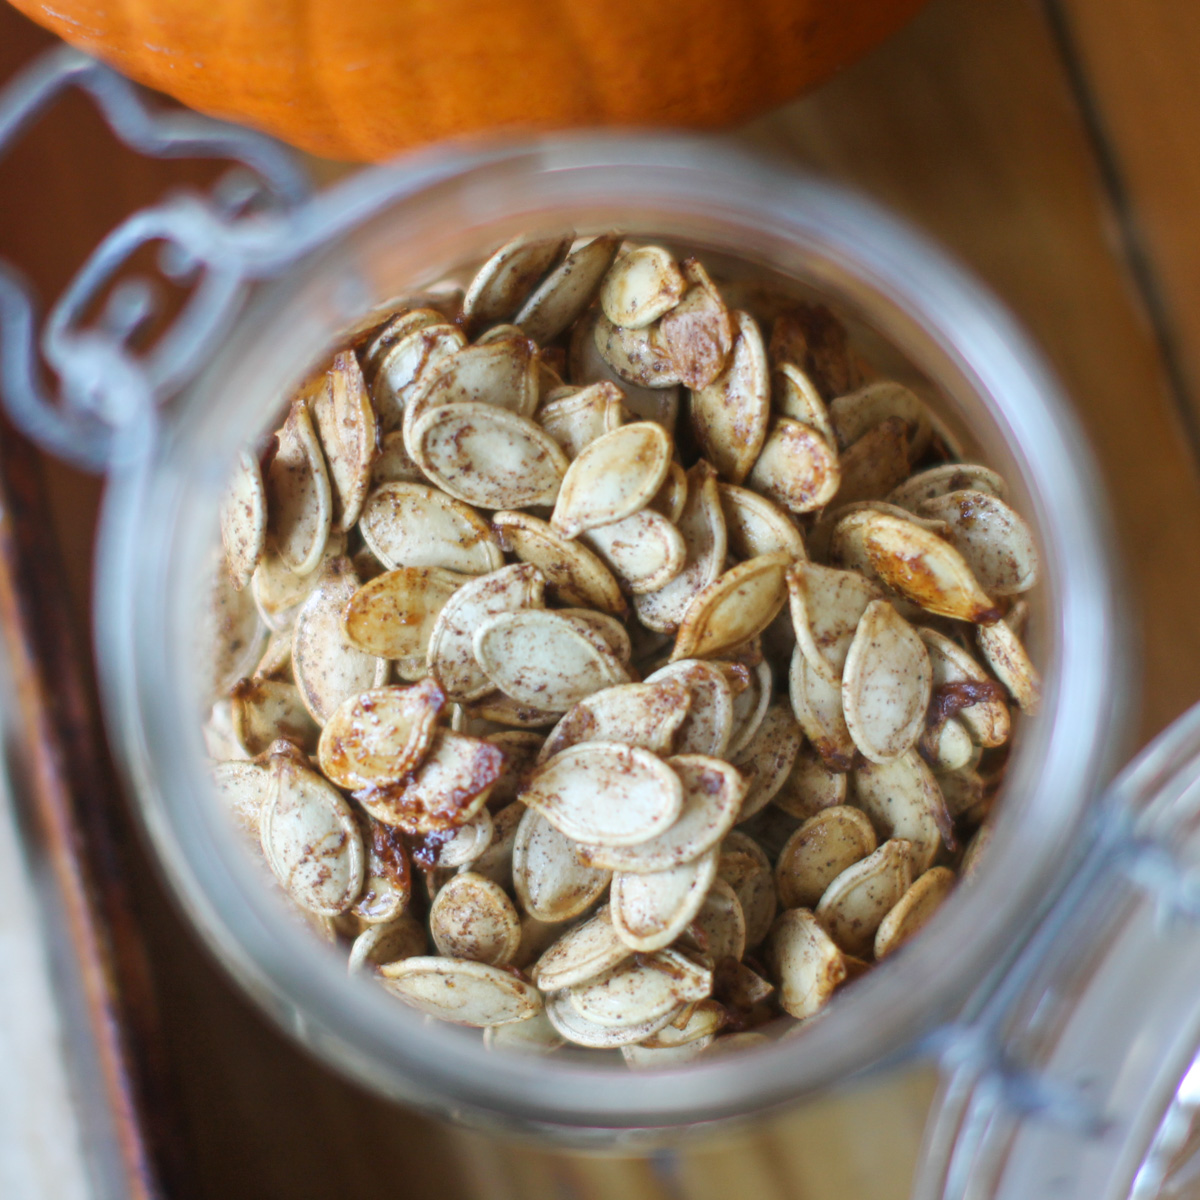 Looking down into a jar of sweet and salty roasted pumpkin seeds.